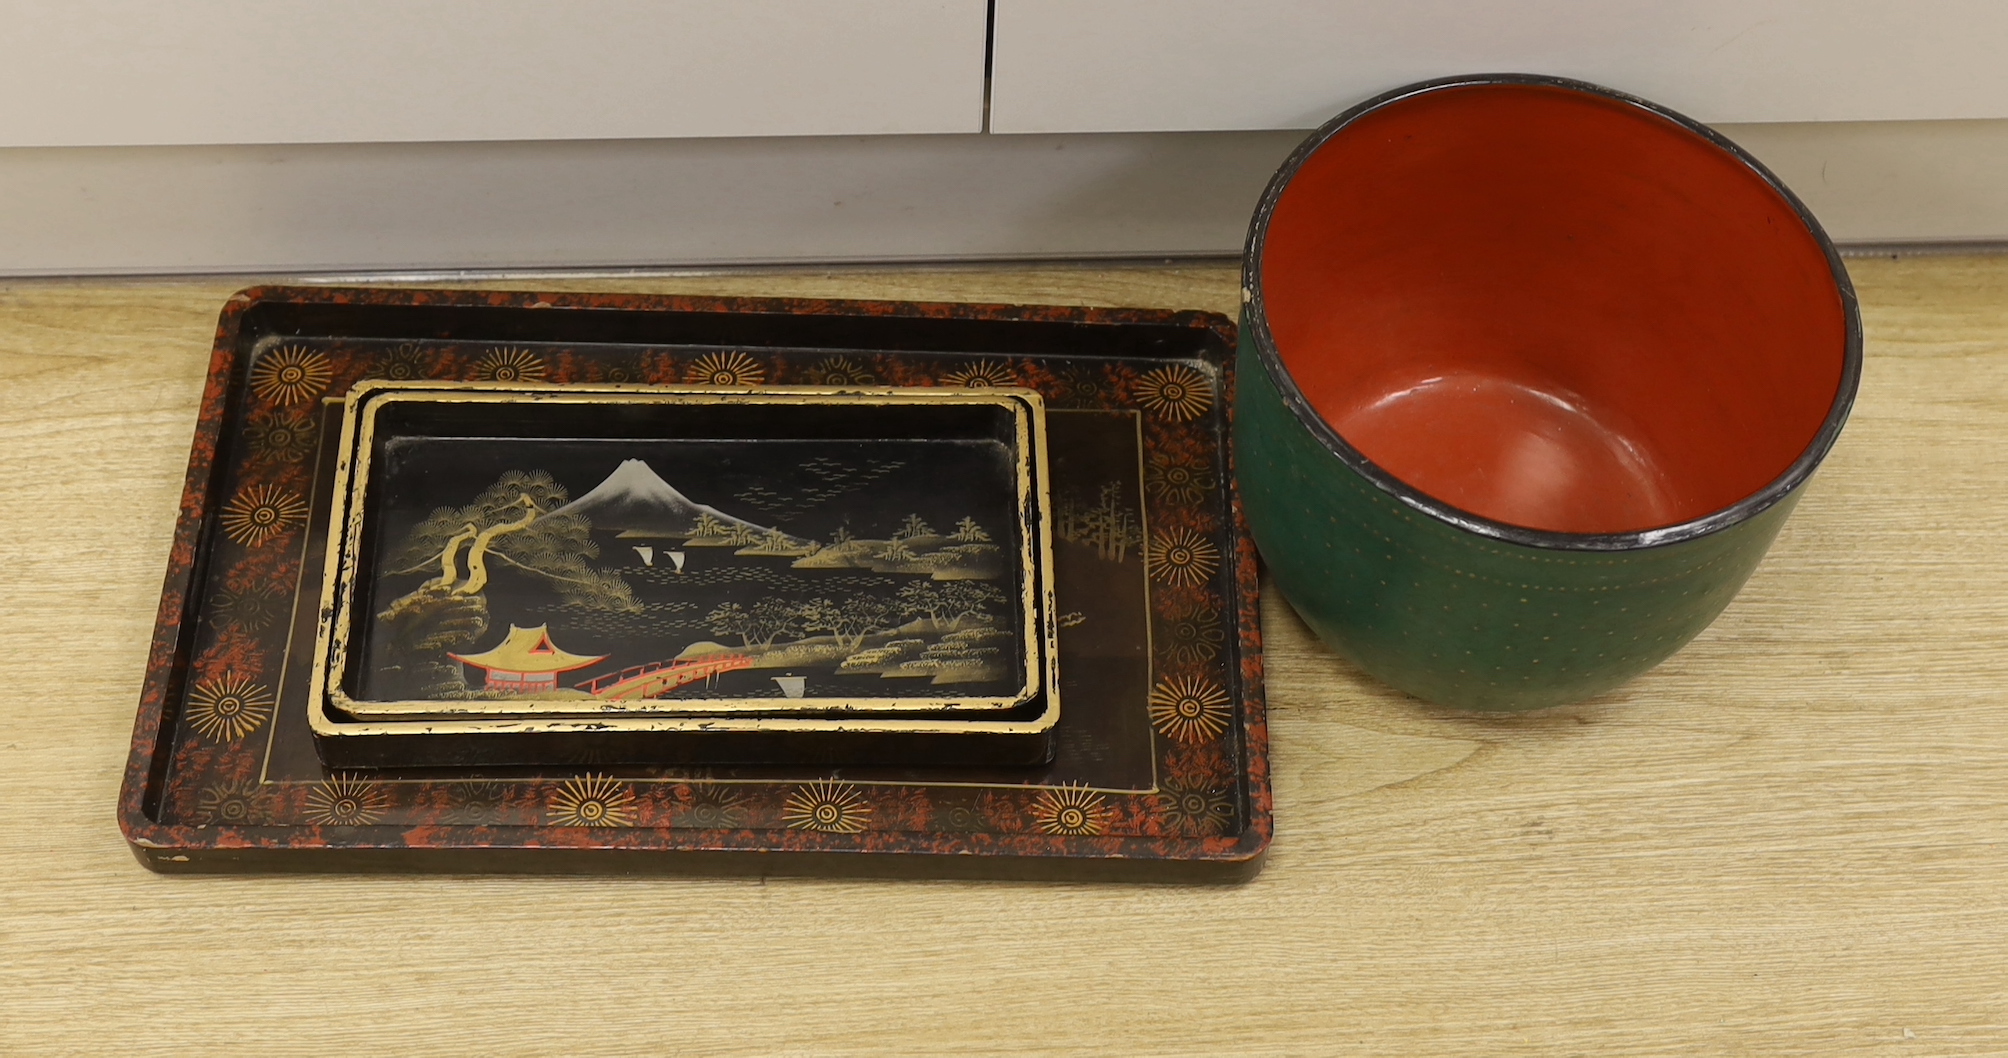 A Thai lacquer bowl and three Chinese lacquer rectangular trays, bowl 18.5cm high